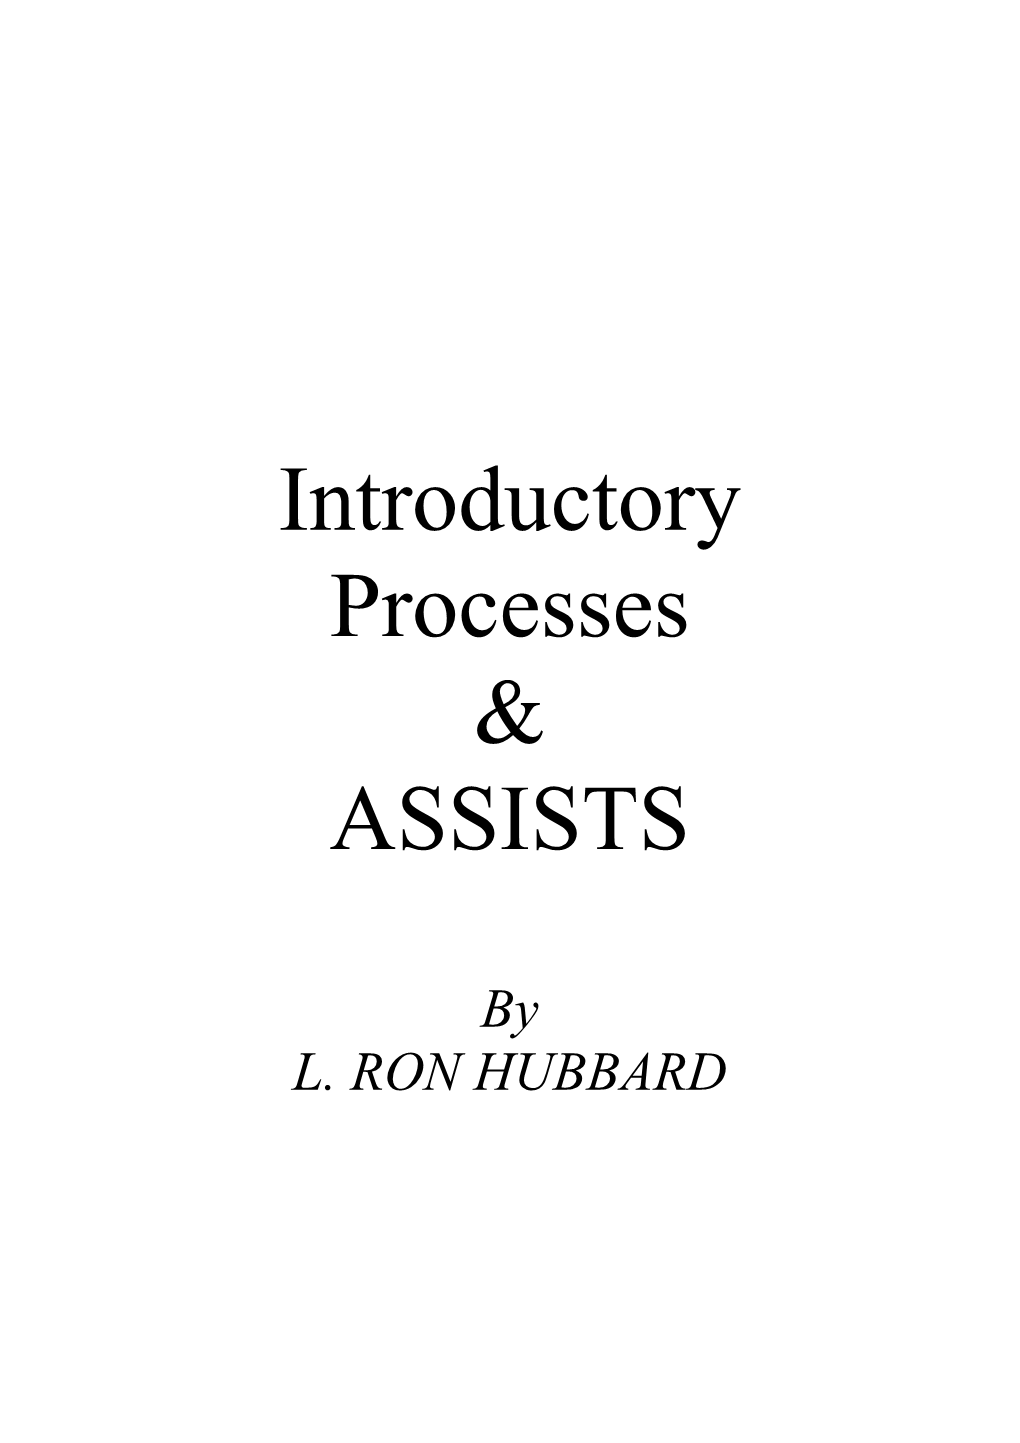 Introductory Processes & ASSISTS